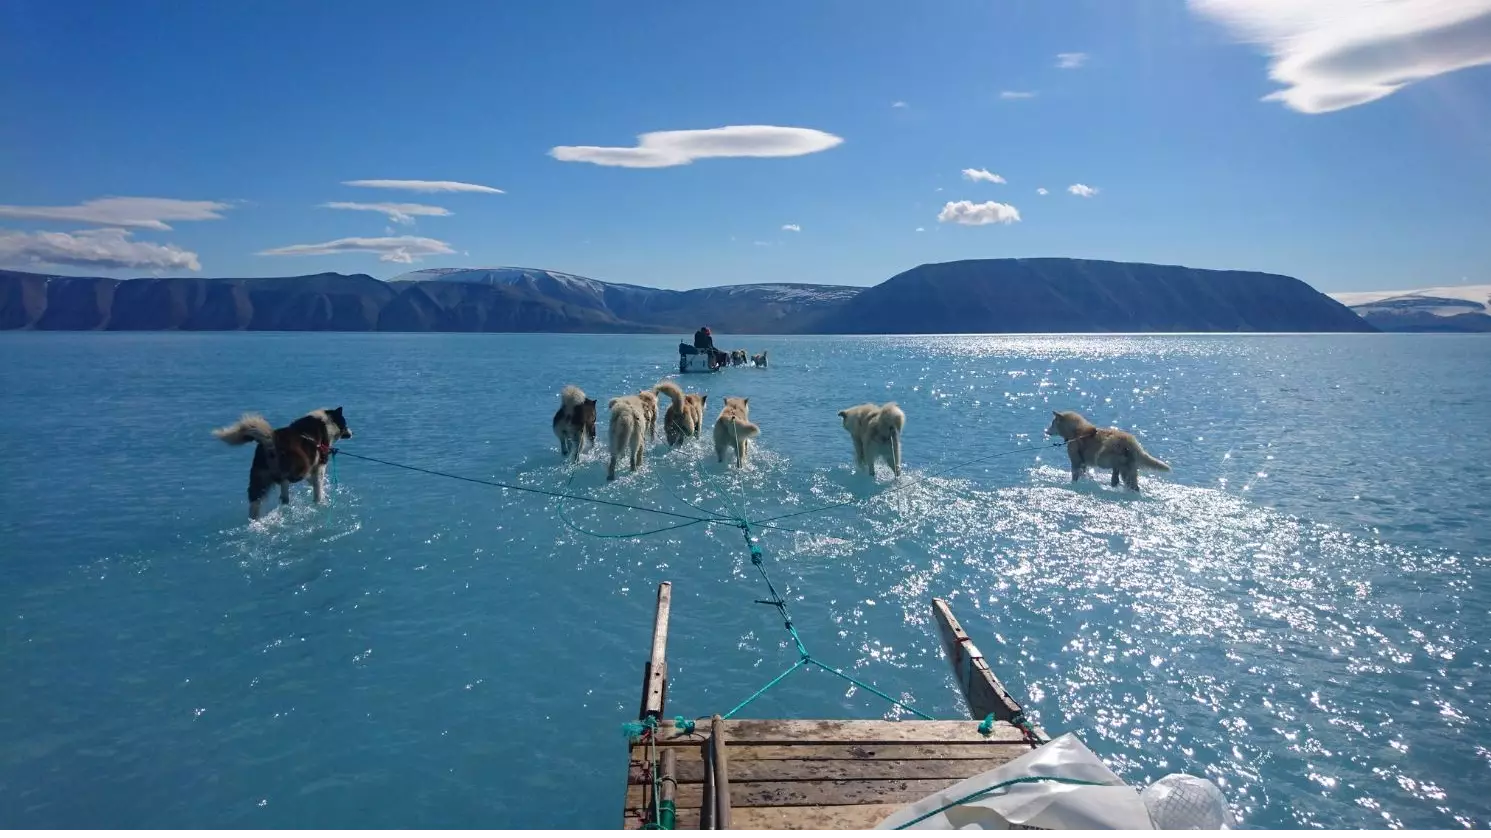 Photograph Of Dogs Walking Through Water Shows Reality Of Greenland's Melting Ice Sheet